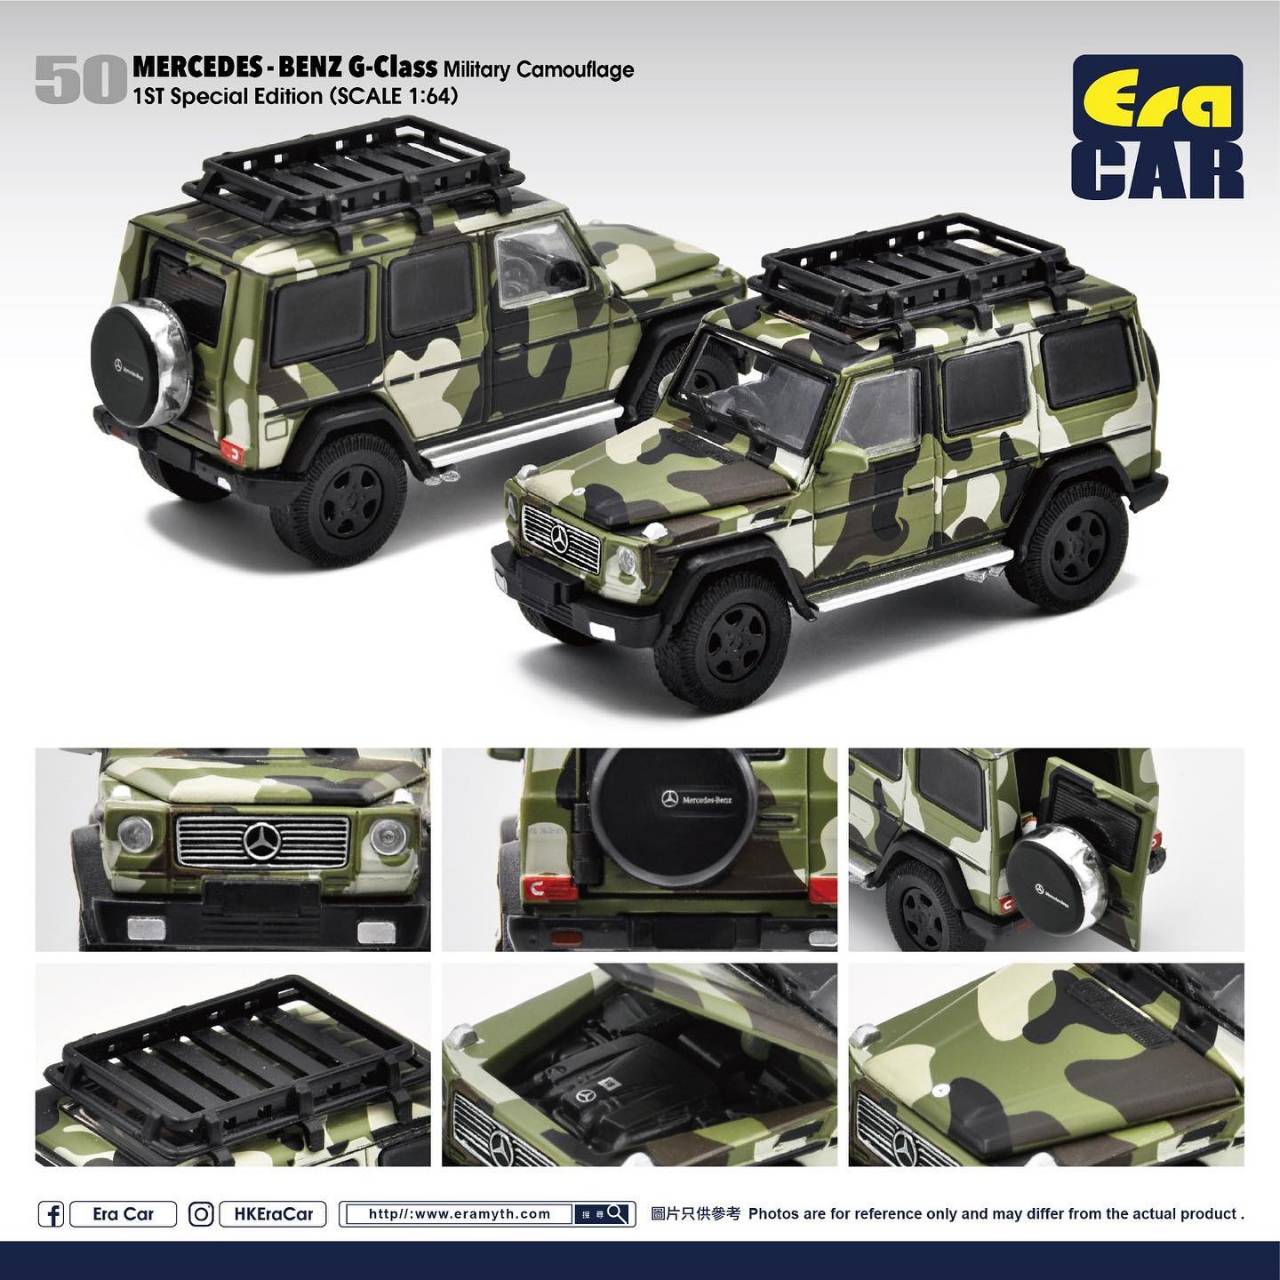 Era Car #50 1st Edition Mercedes-Benz G63 AMG Scale 1:64 Military Camouflage